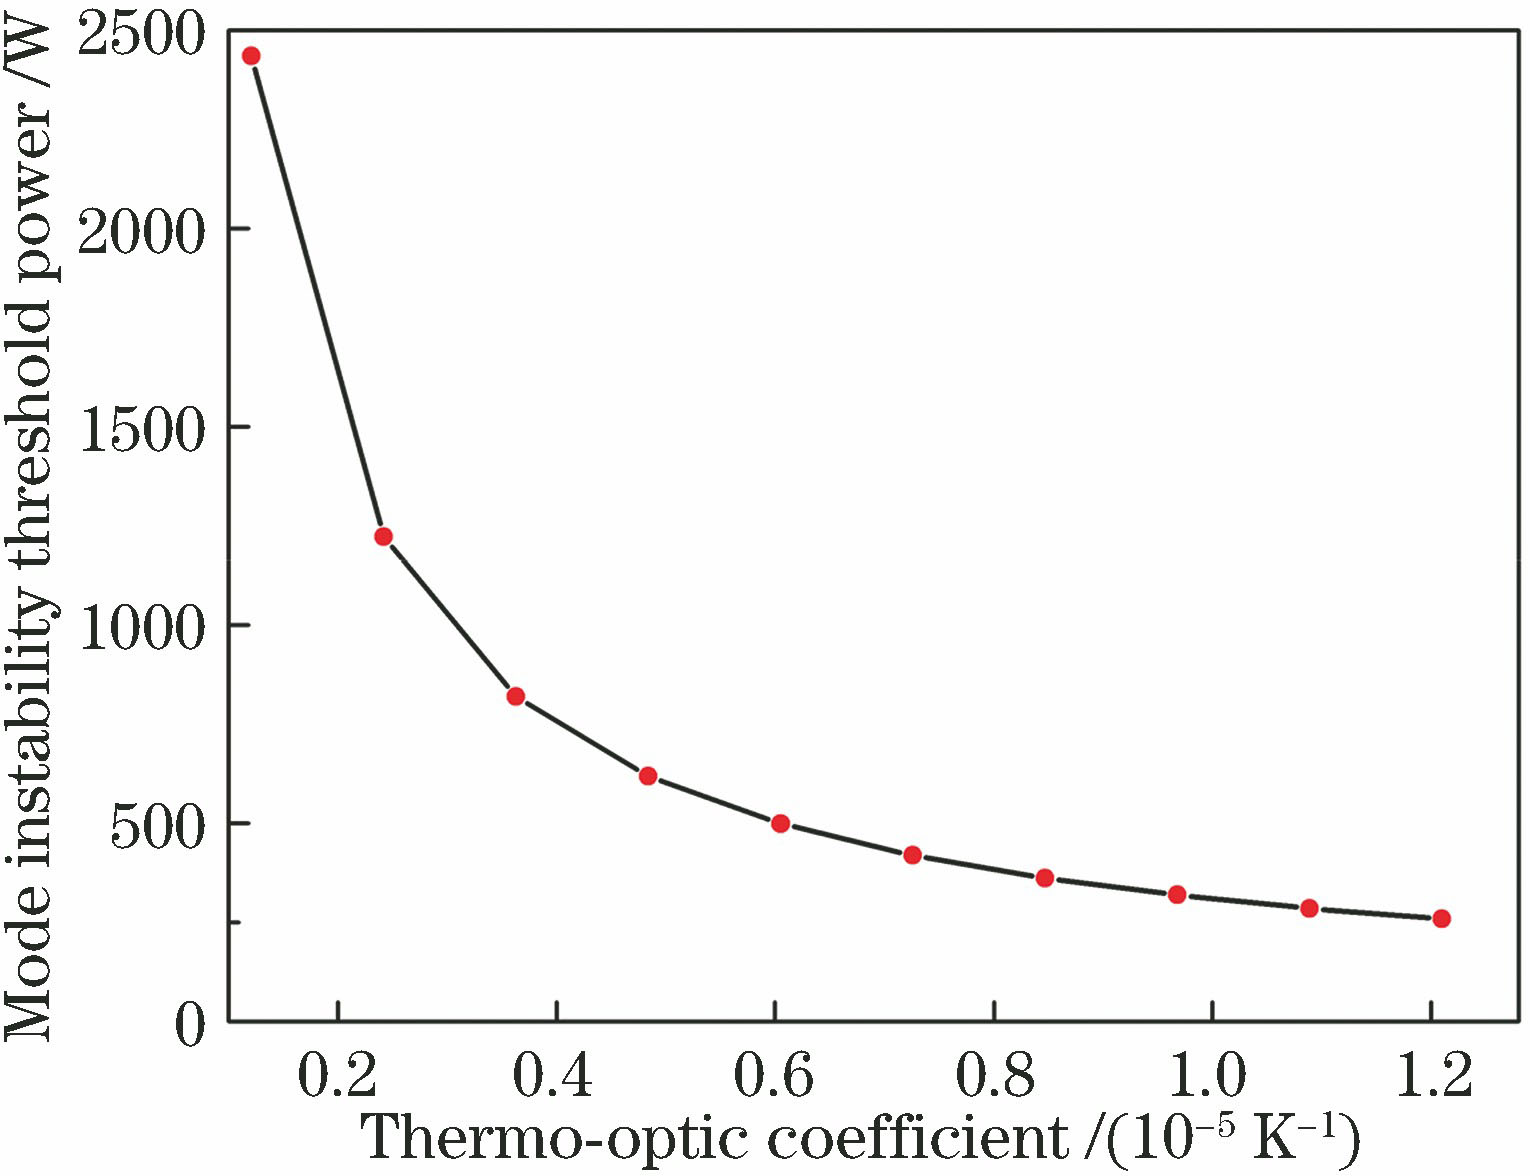 Effect of reducing thermo-optic coefficient on mode instability threshold power